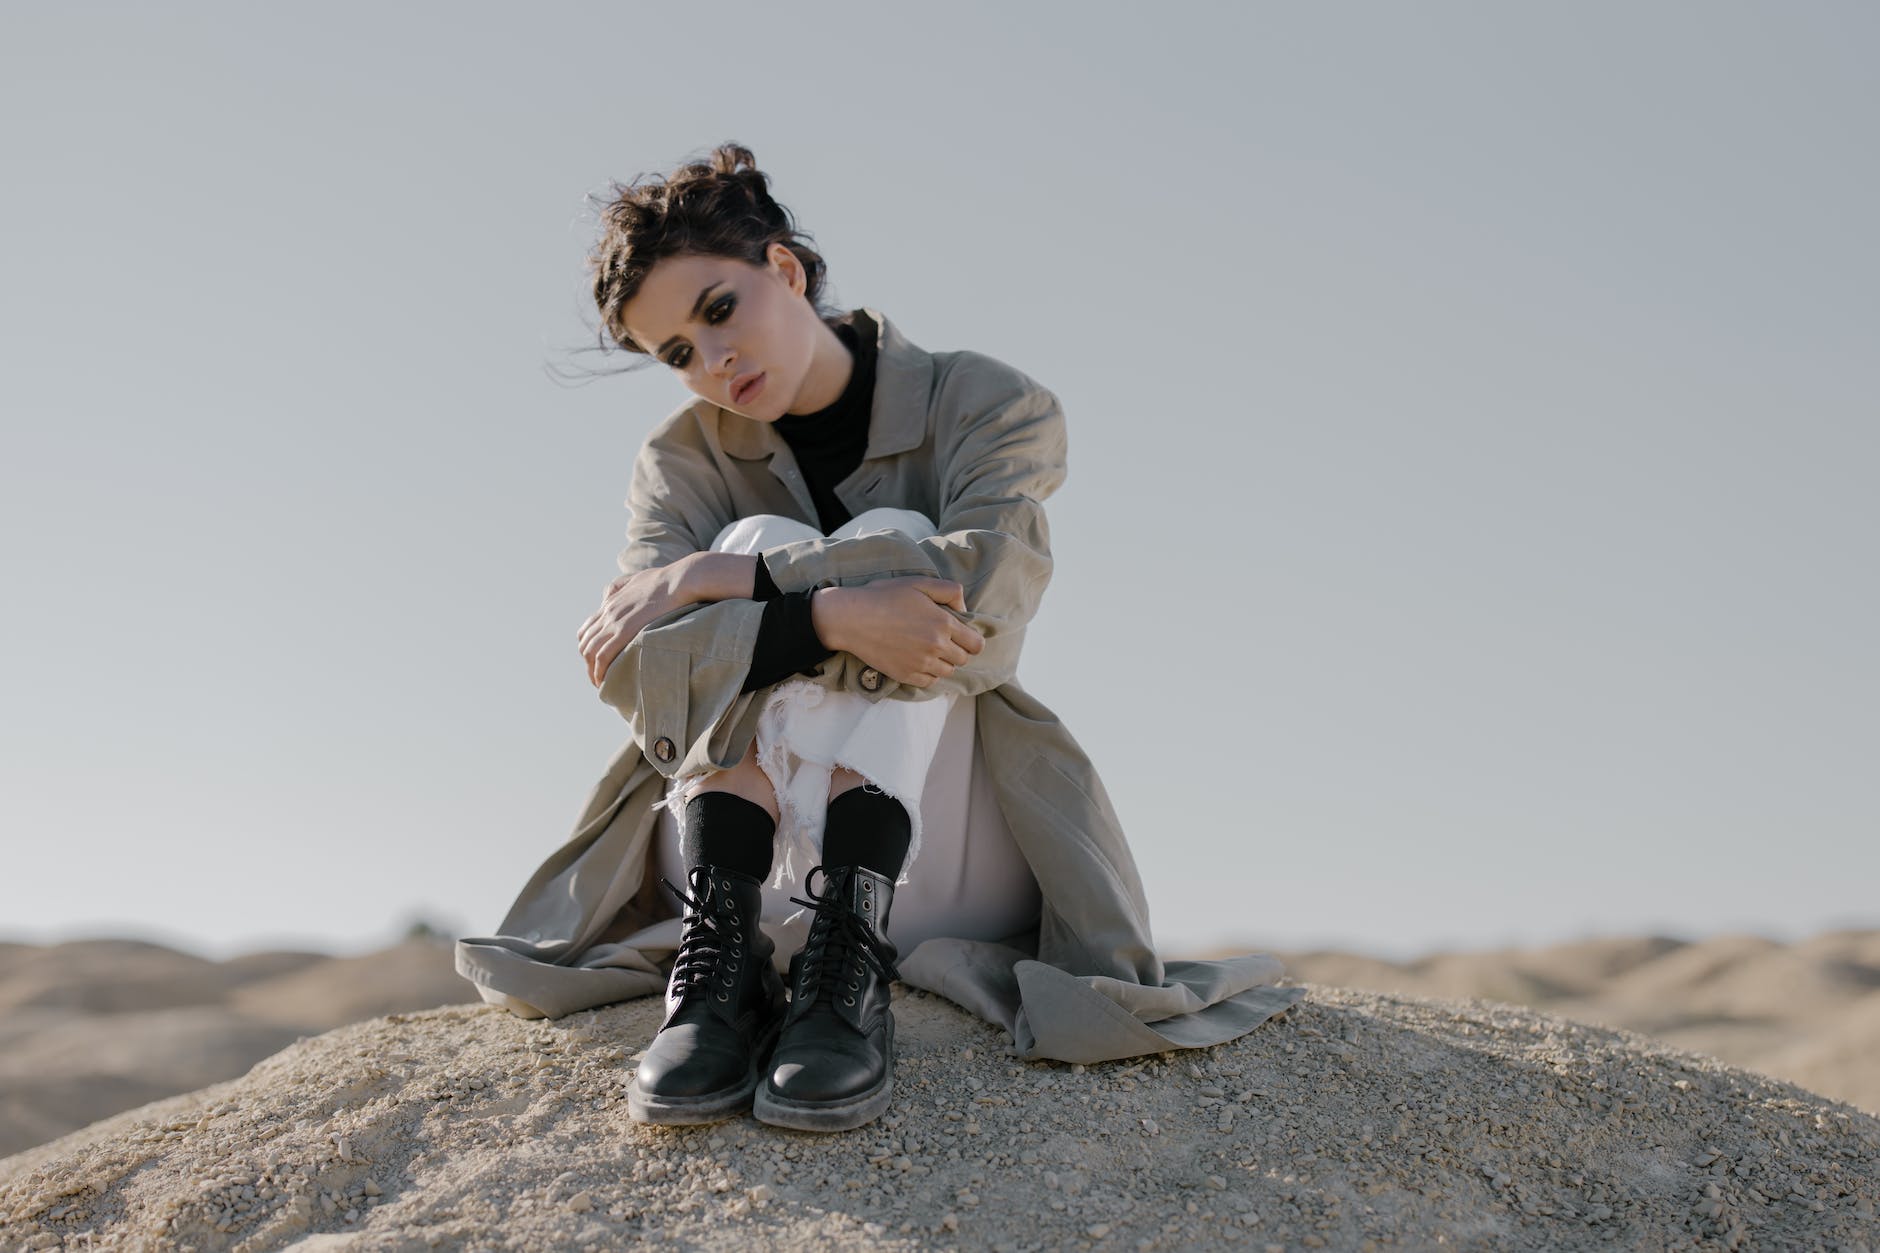 woman in a trench coat and black boots sitting on dirt ground - Ethical Isn't Always Best